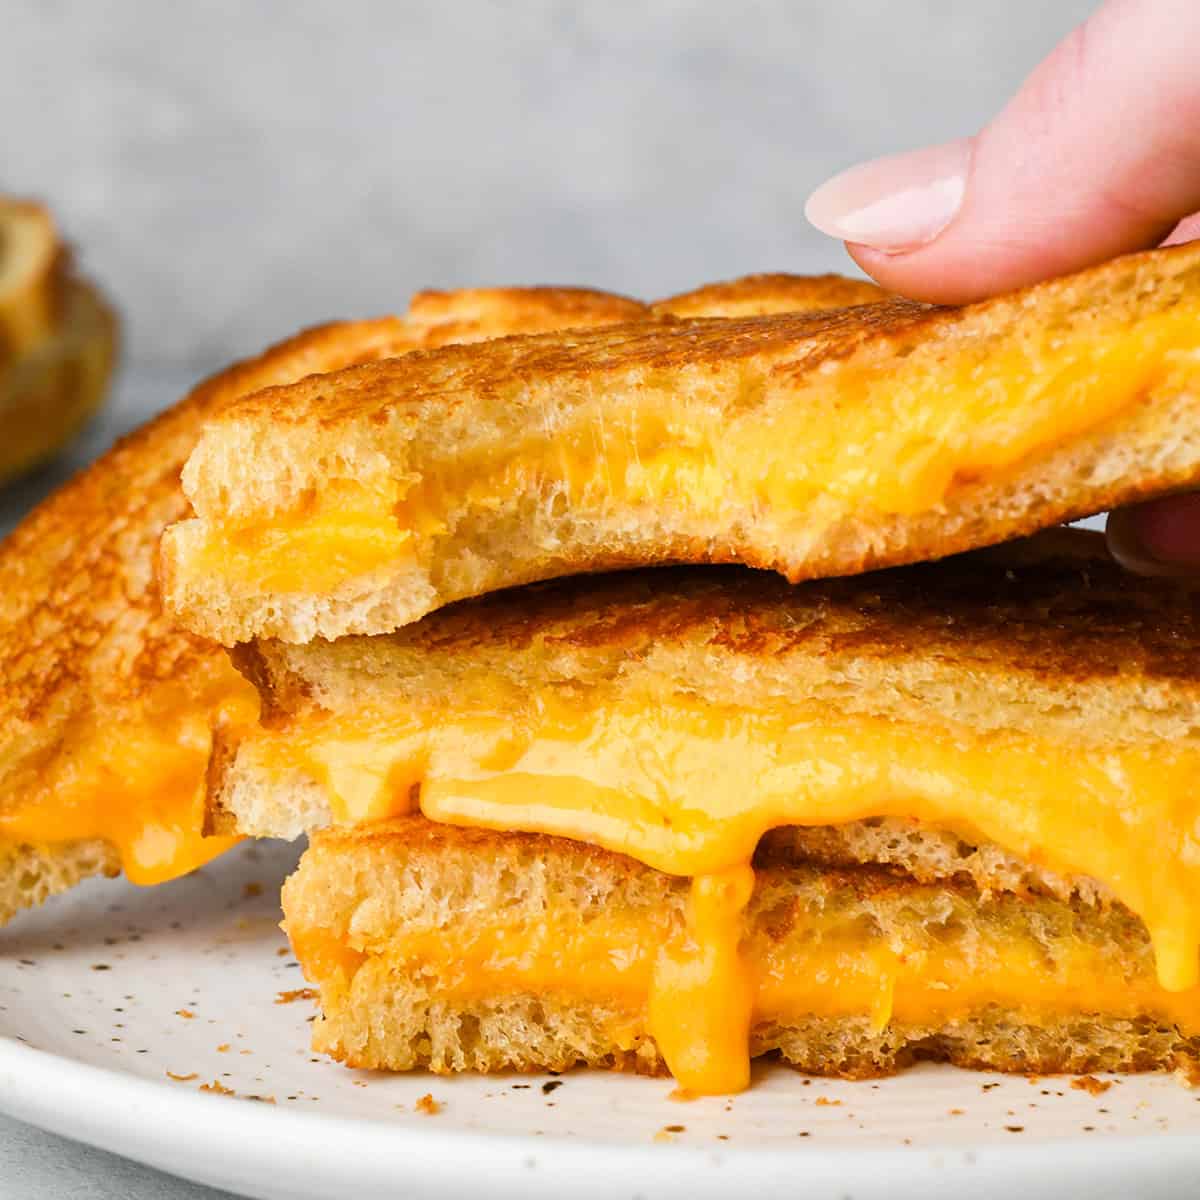 a stack of three halves of grilled cheese sandwiches, the top one with a bite taken out of it